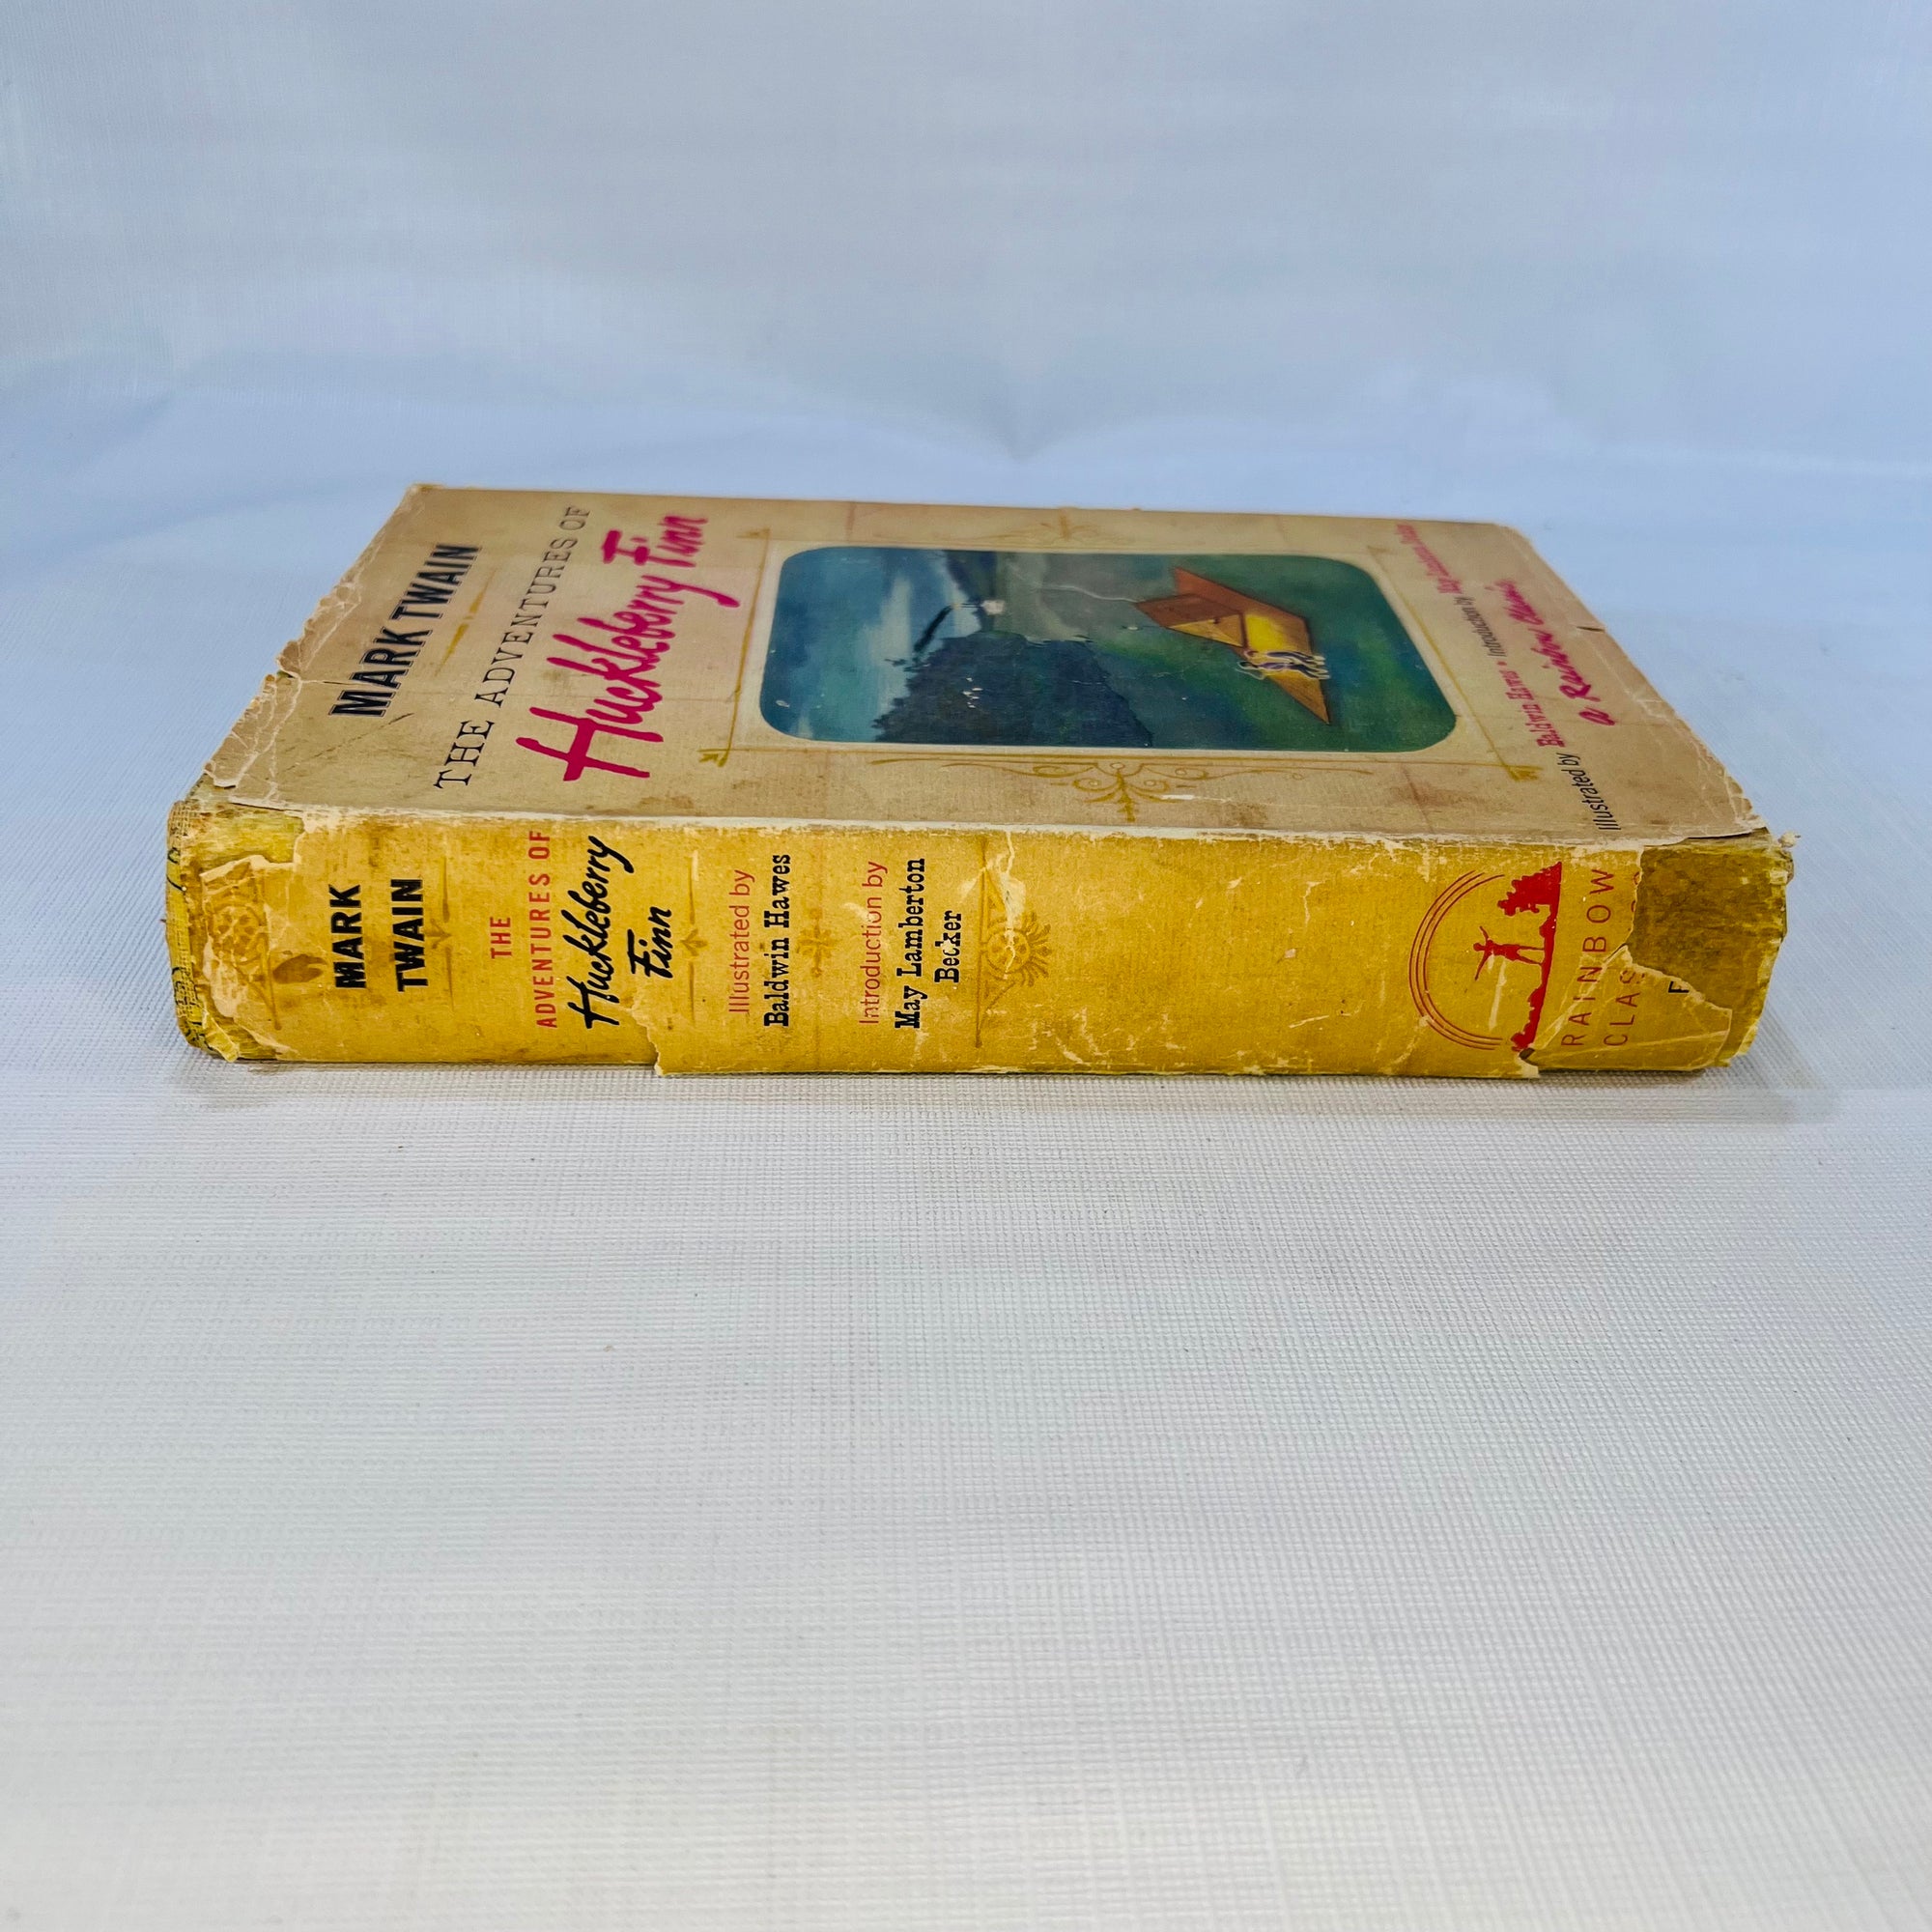 The Adventures of Huckleberry Finn by Mark Twain illustrated by Baldwin Hawes 1947 A Rainbow Classic The World Publishing Company